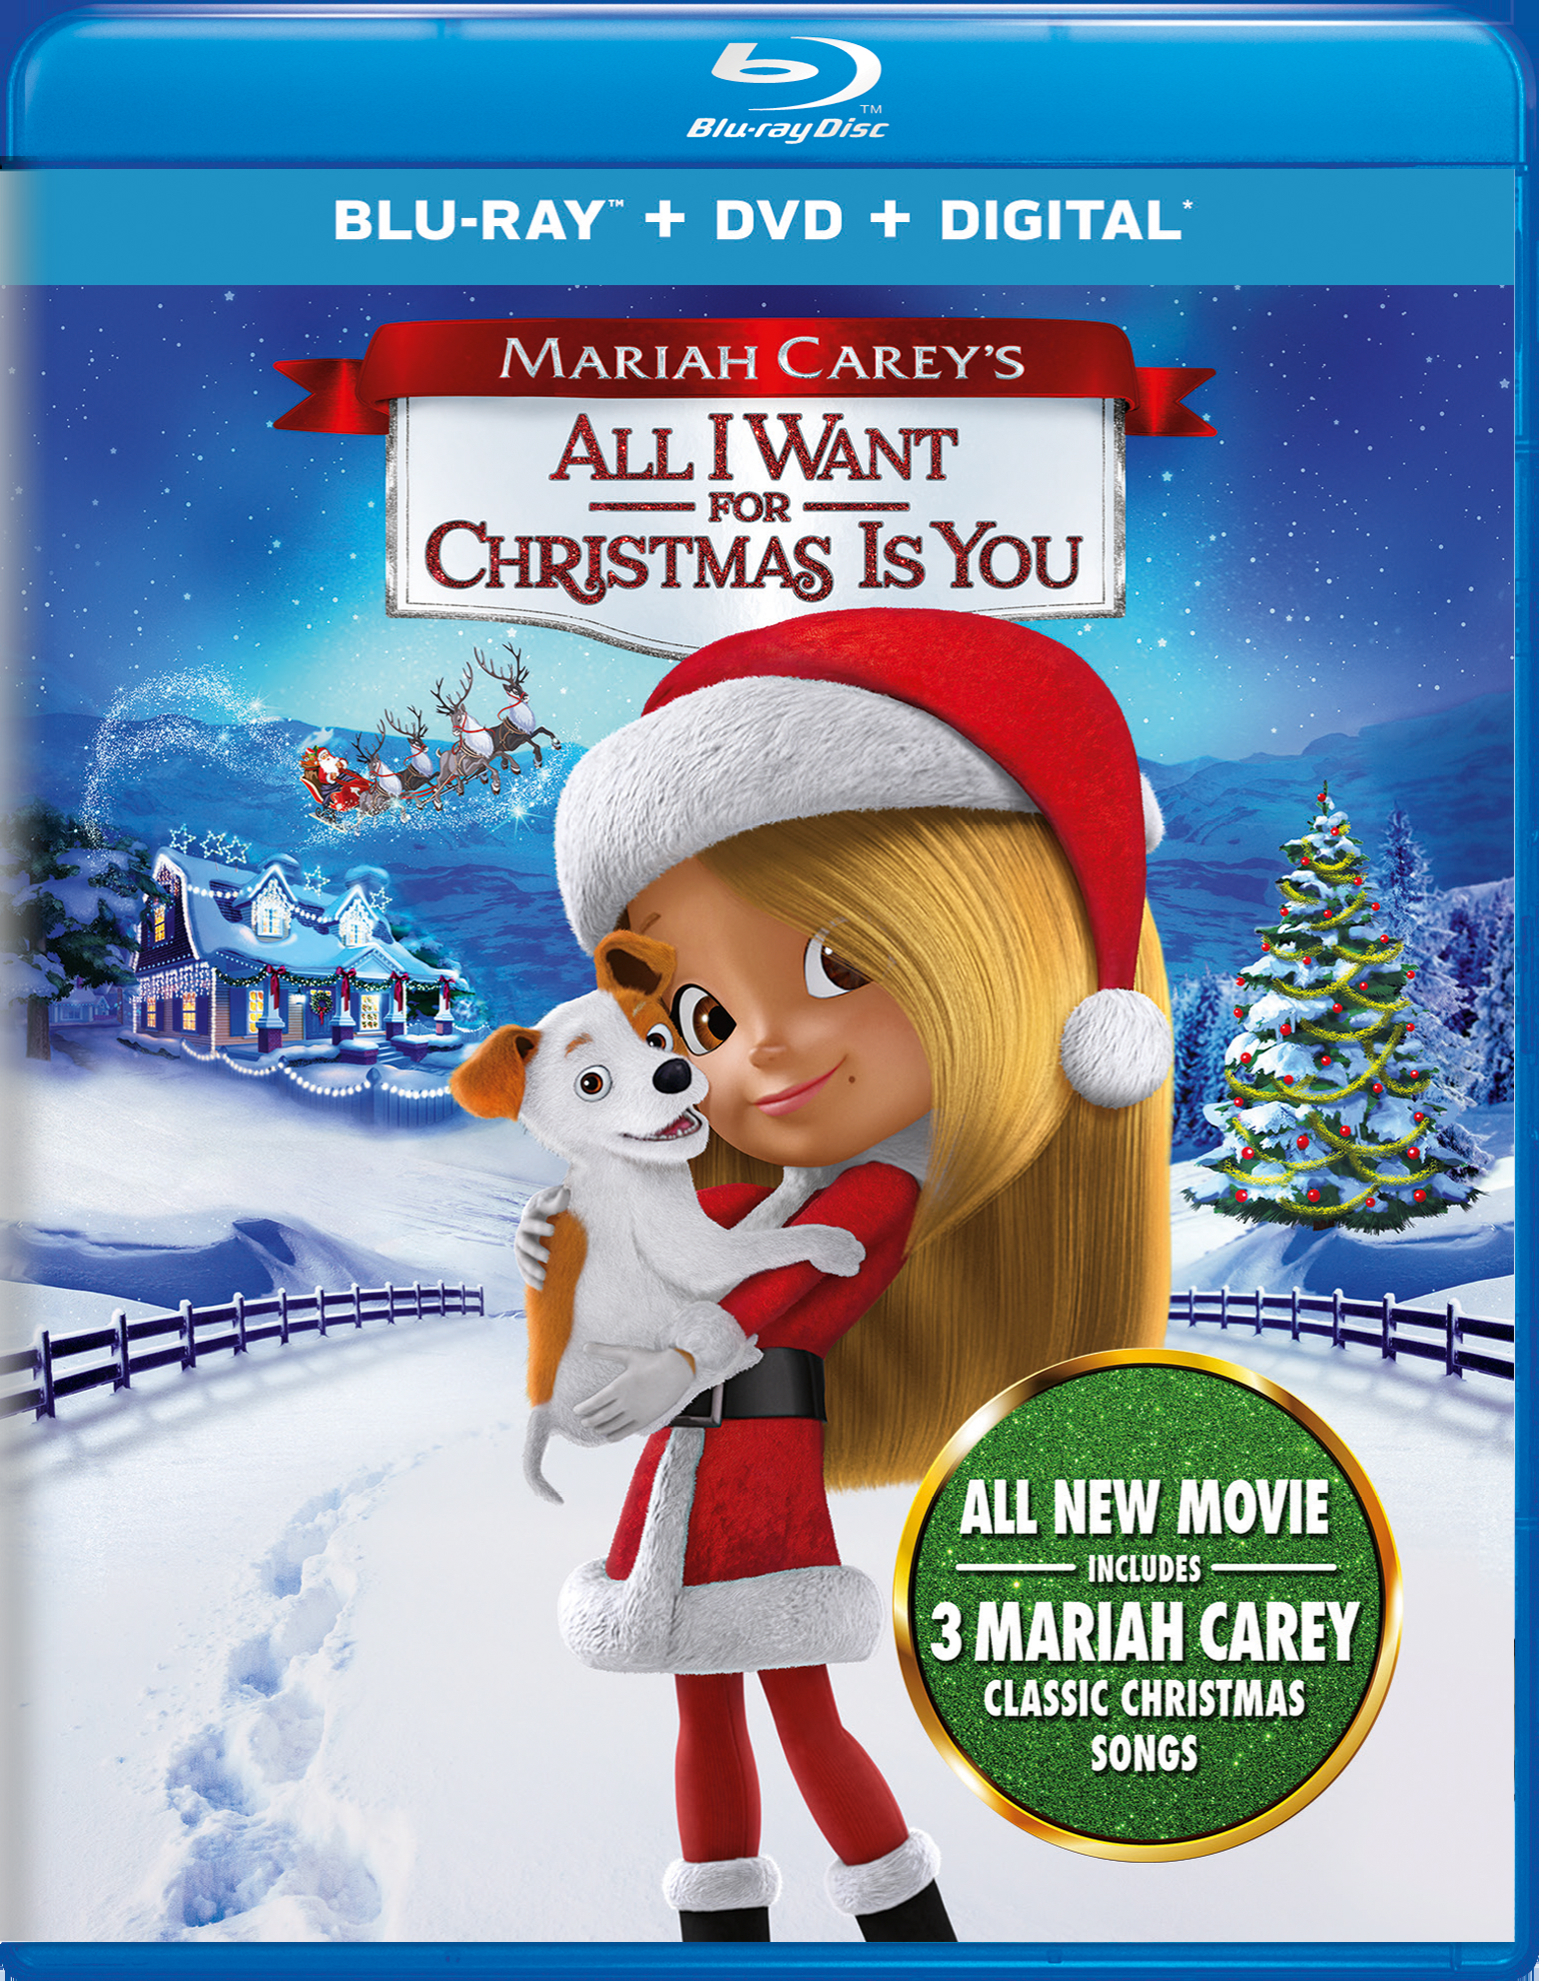 Mariah Carey's All I Want For Christmas Is You (DVD + Digital) - Blu-ray [ 2017 ]  - Children Movies On Blu-ray - Movies On GRUV